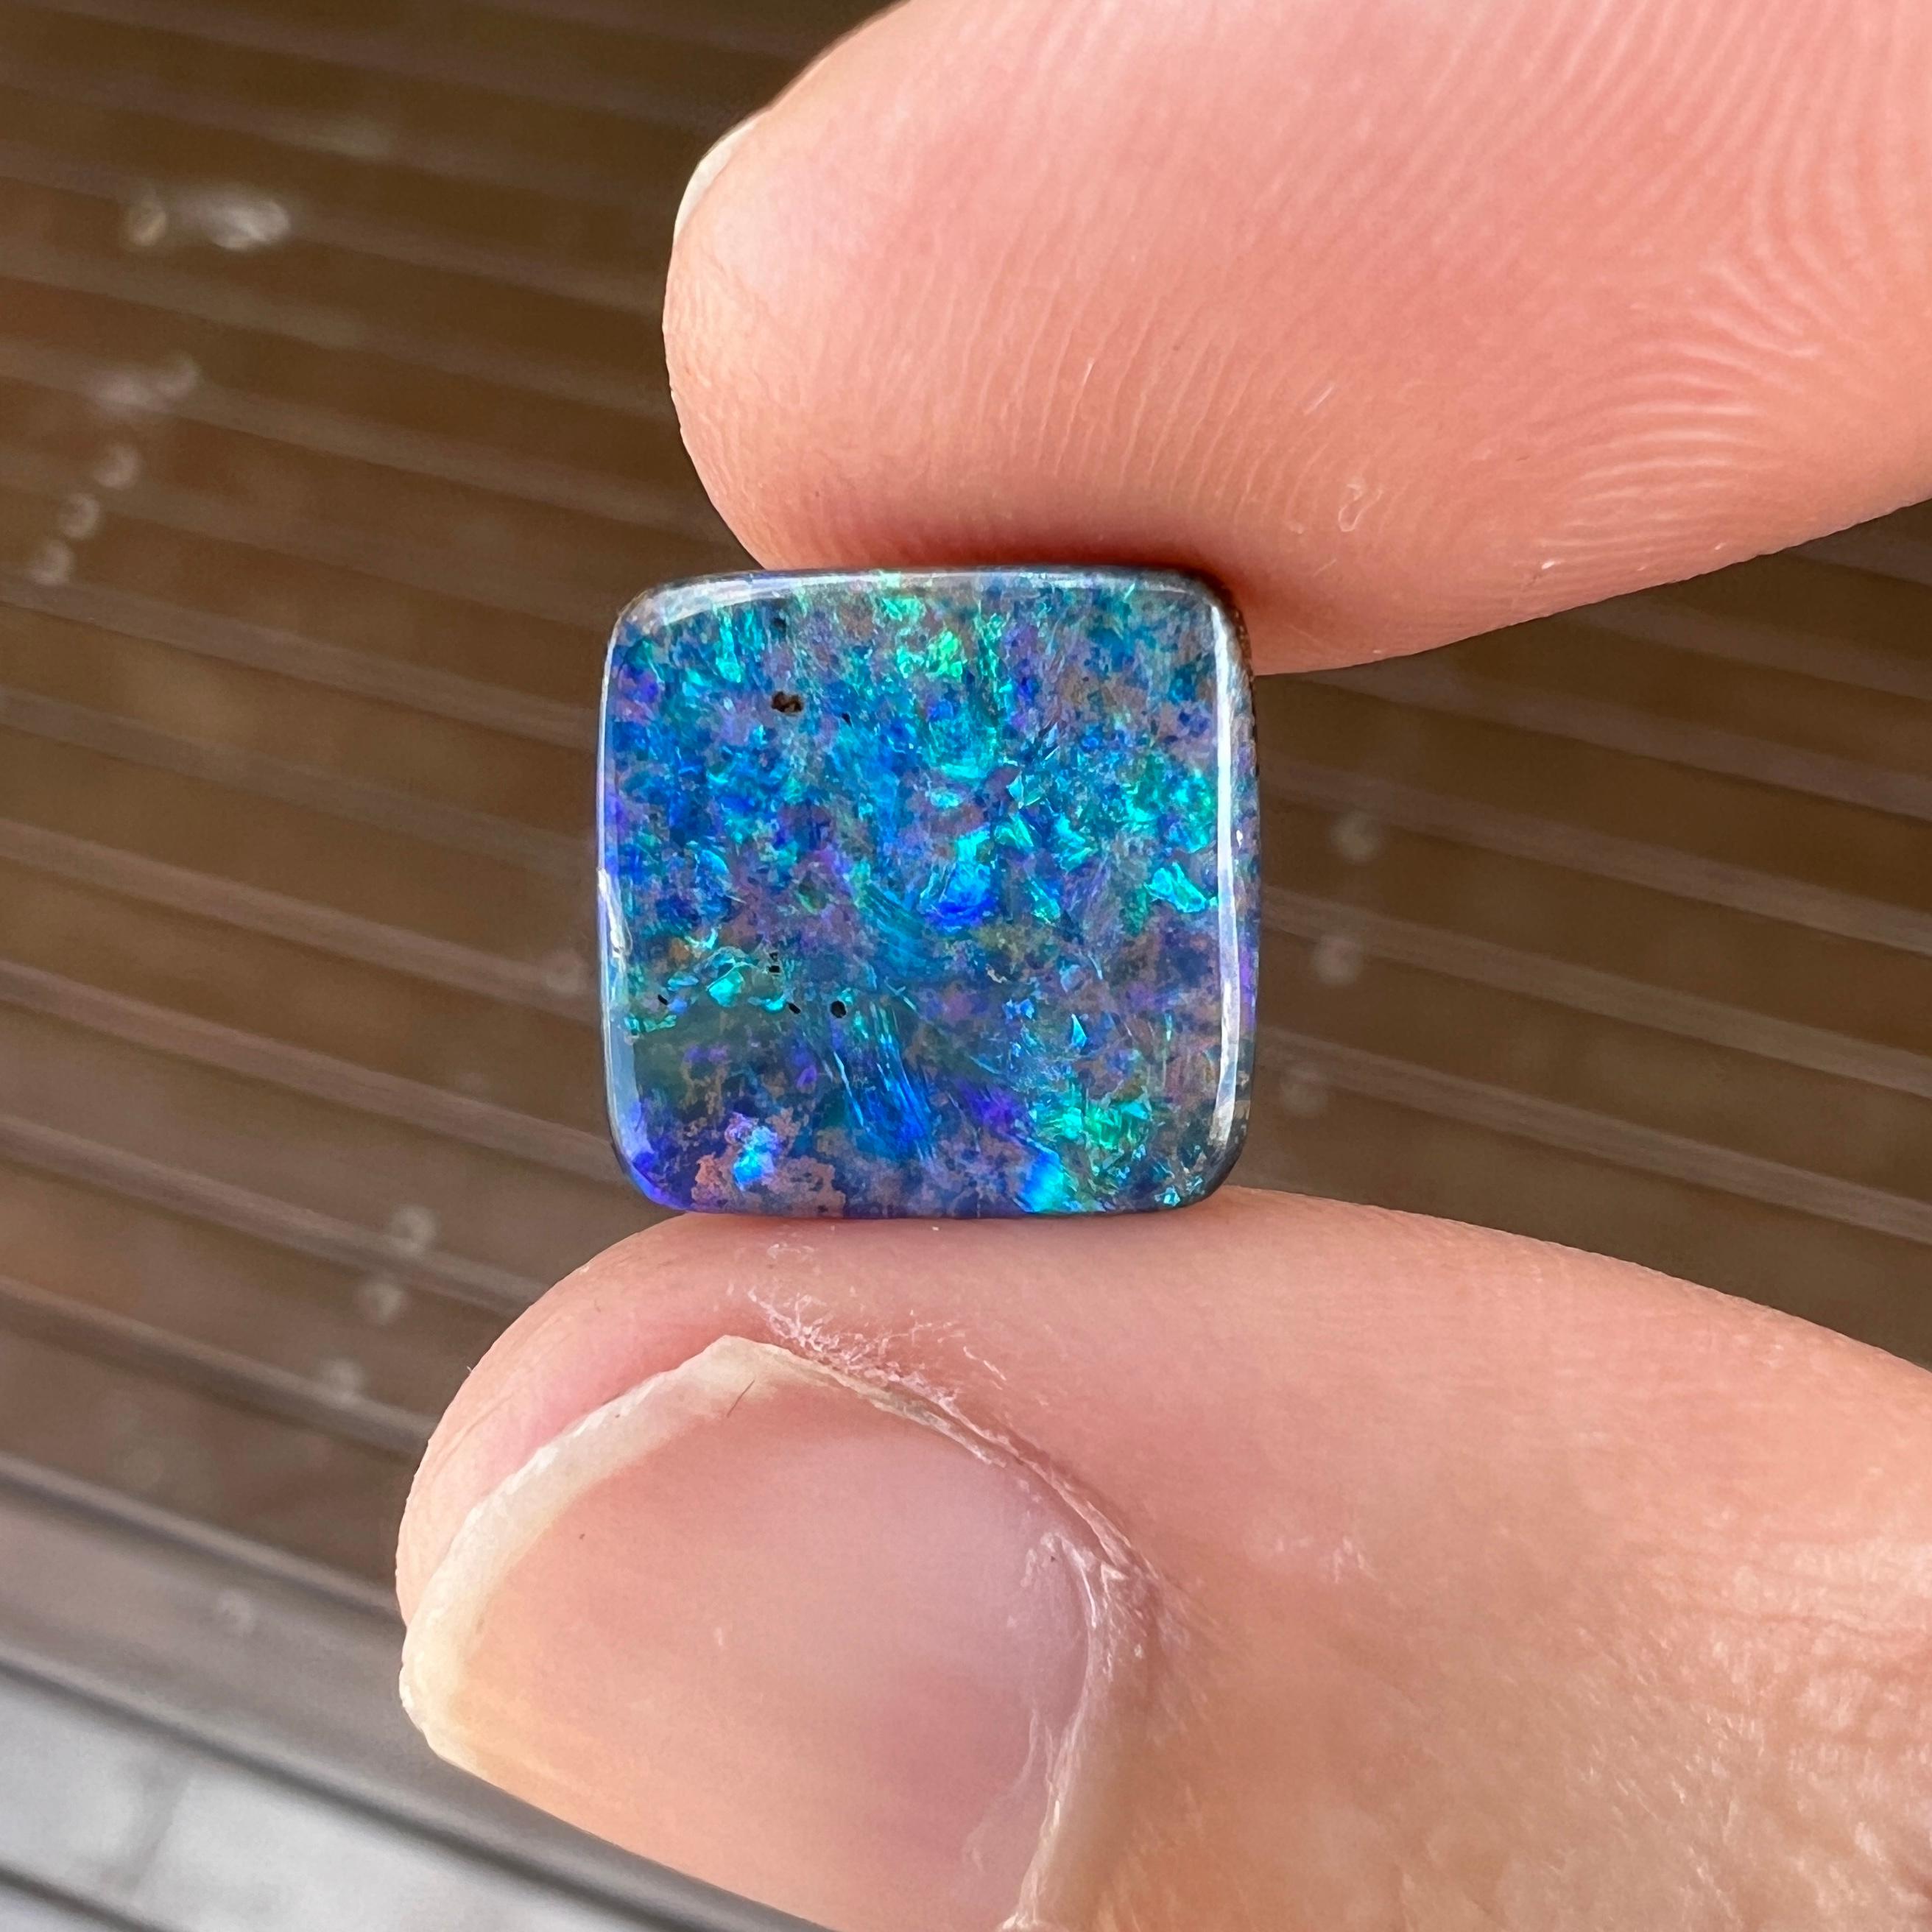 This beautiful 4.38 Ct Australian boulder opal was mined by Sue Cooper at her Yaraka opal mine in western Queensland, Australia in 2023. Sue processed the rough opal herself and cut into into a square shape. We especially love the ocean blues and